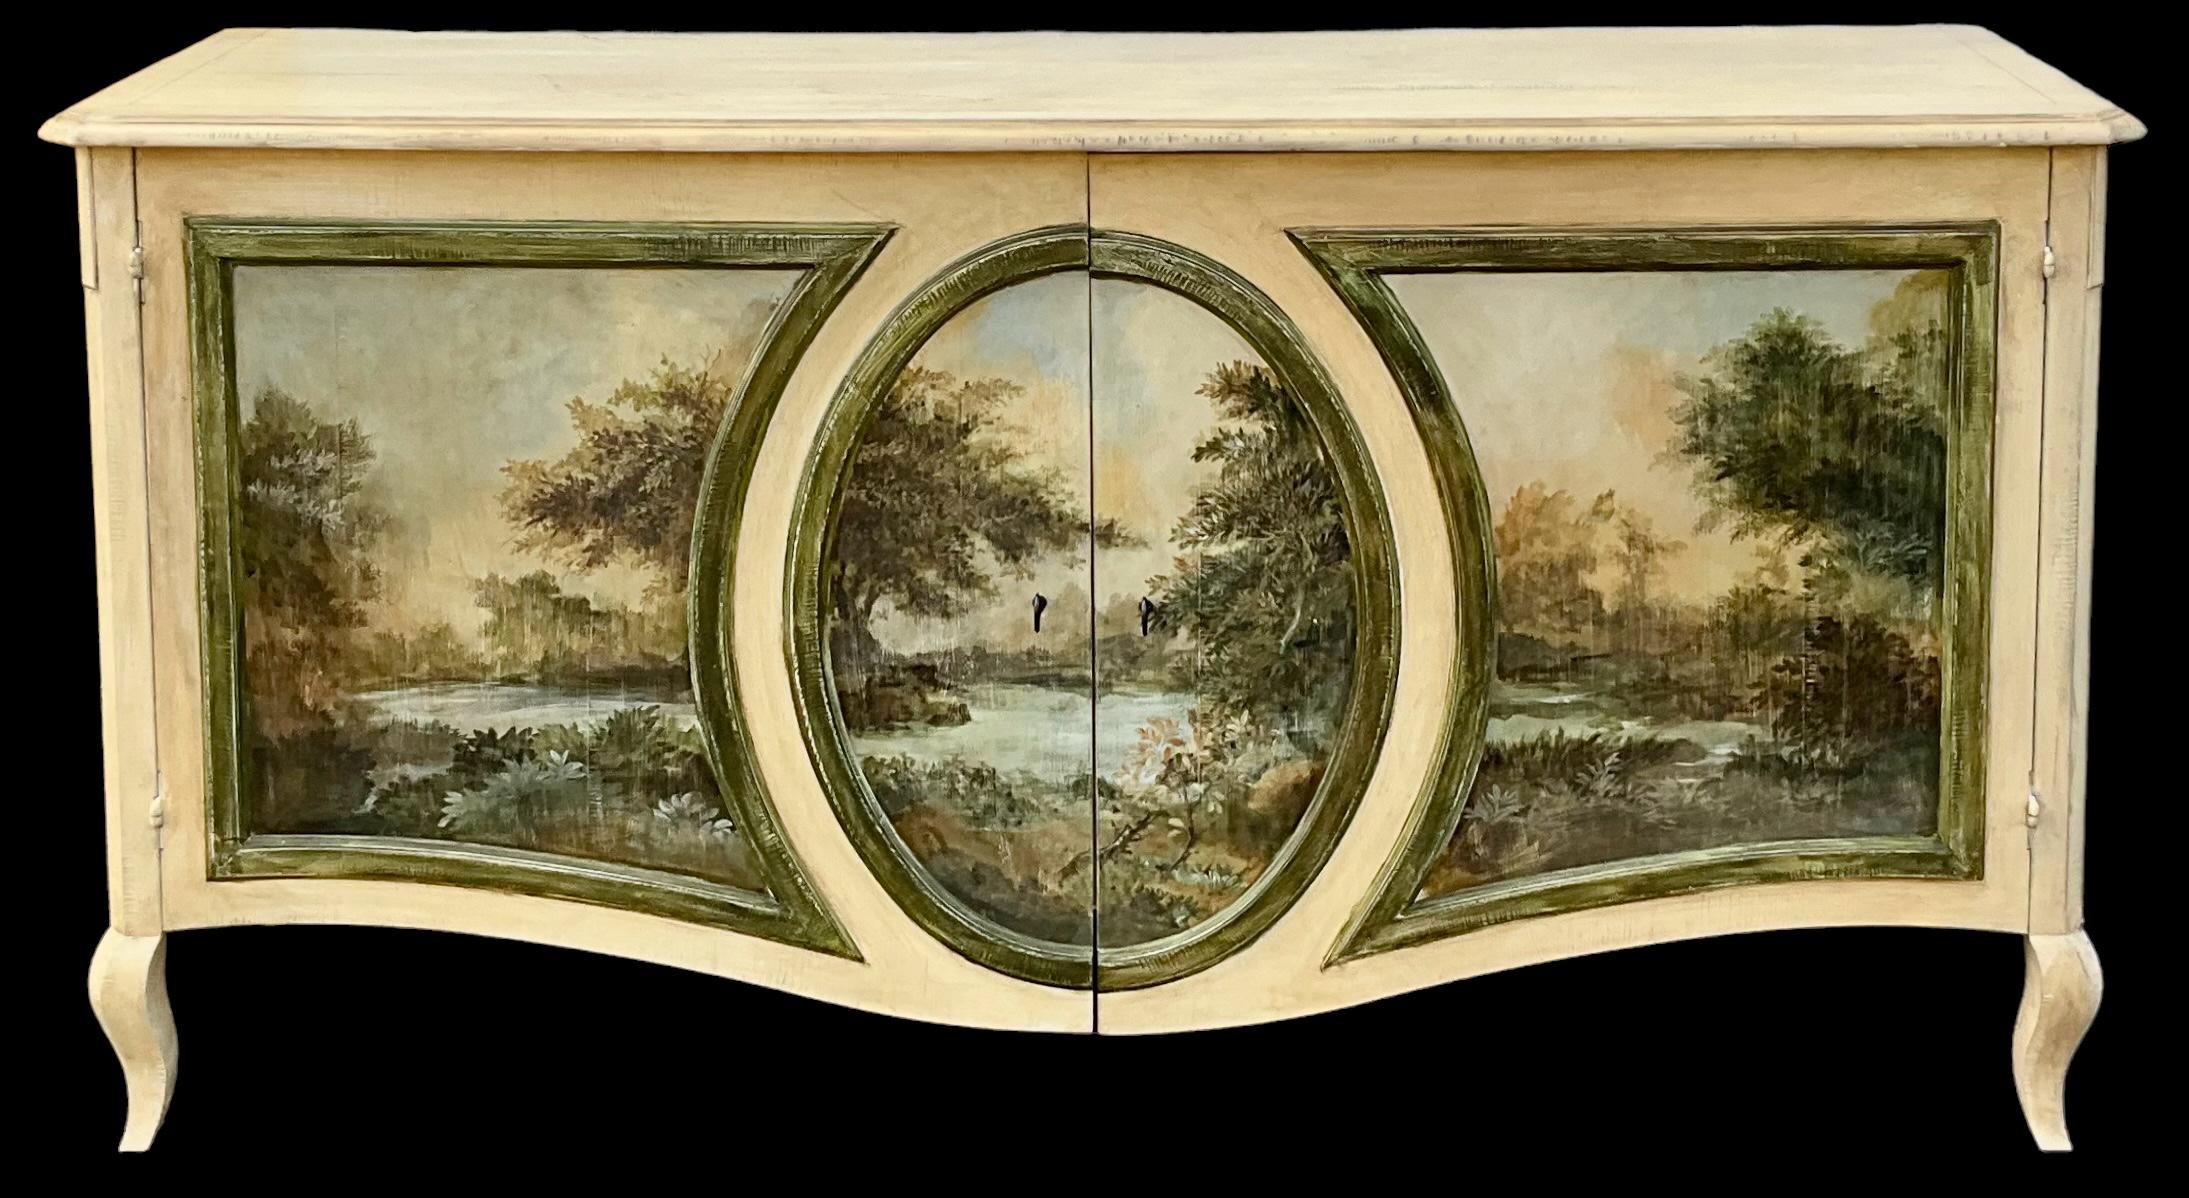 This is a French hand painted cabinet by Grange. The body is an antique ivory distressed finish. The front is a landscape forrest scene. The two doors open to adjustable interior shelving. It is marked. 